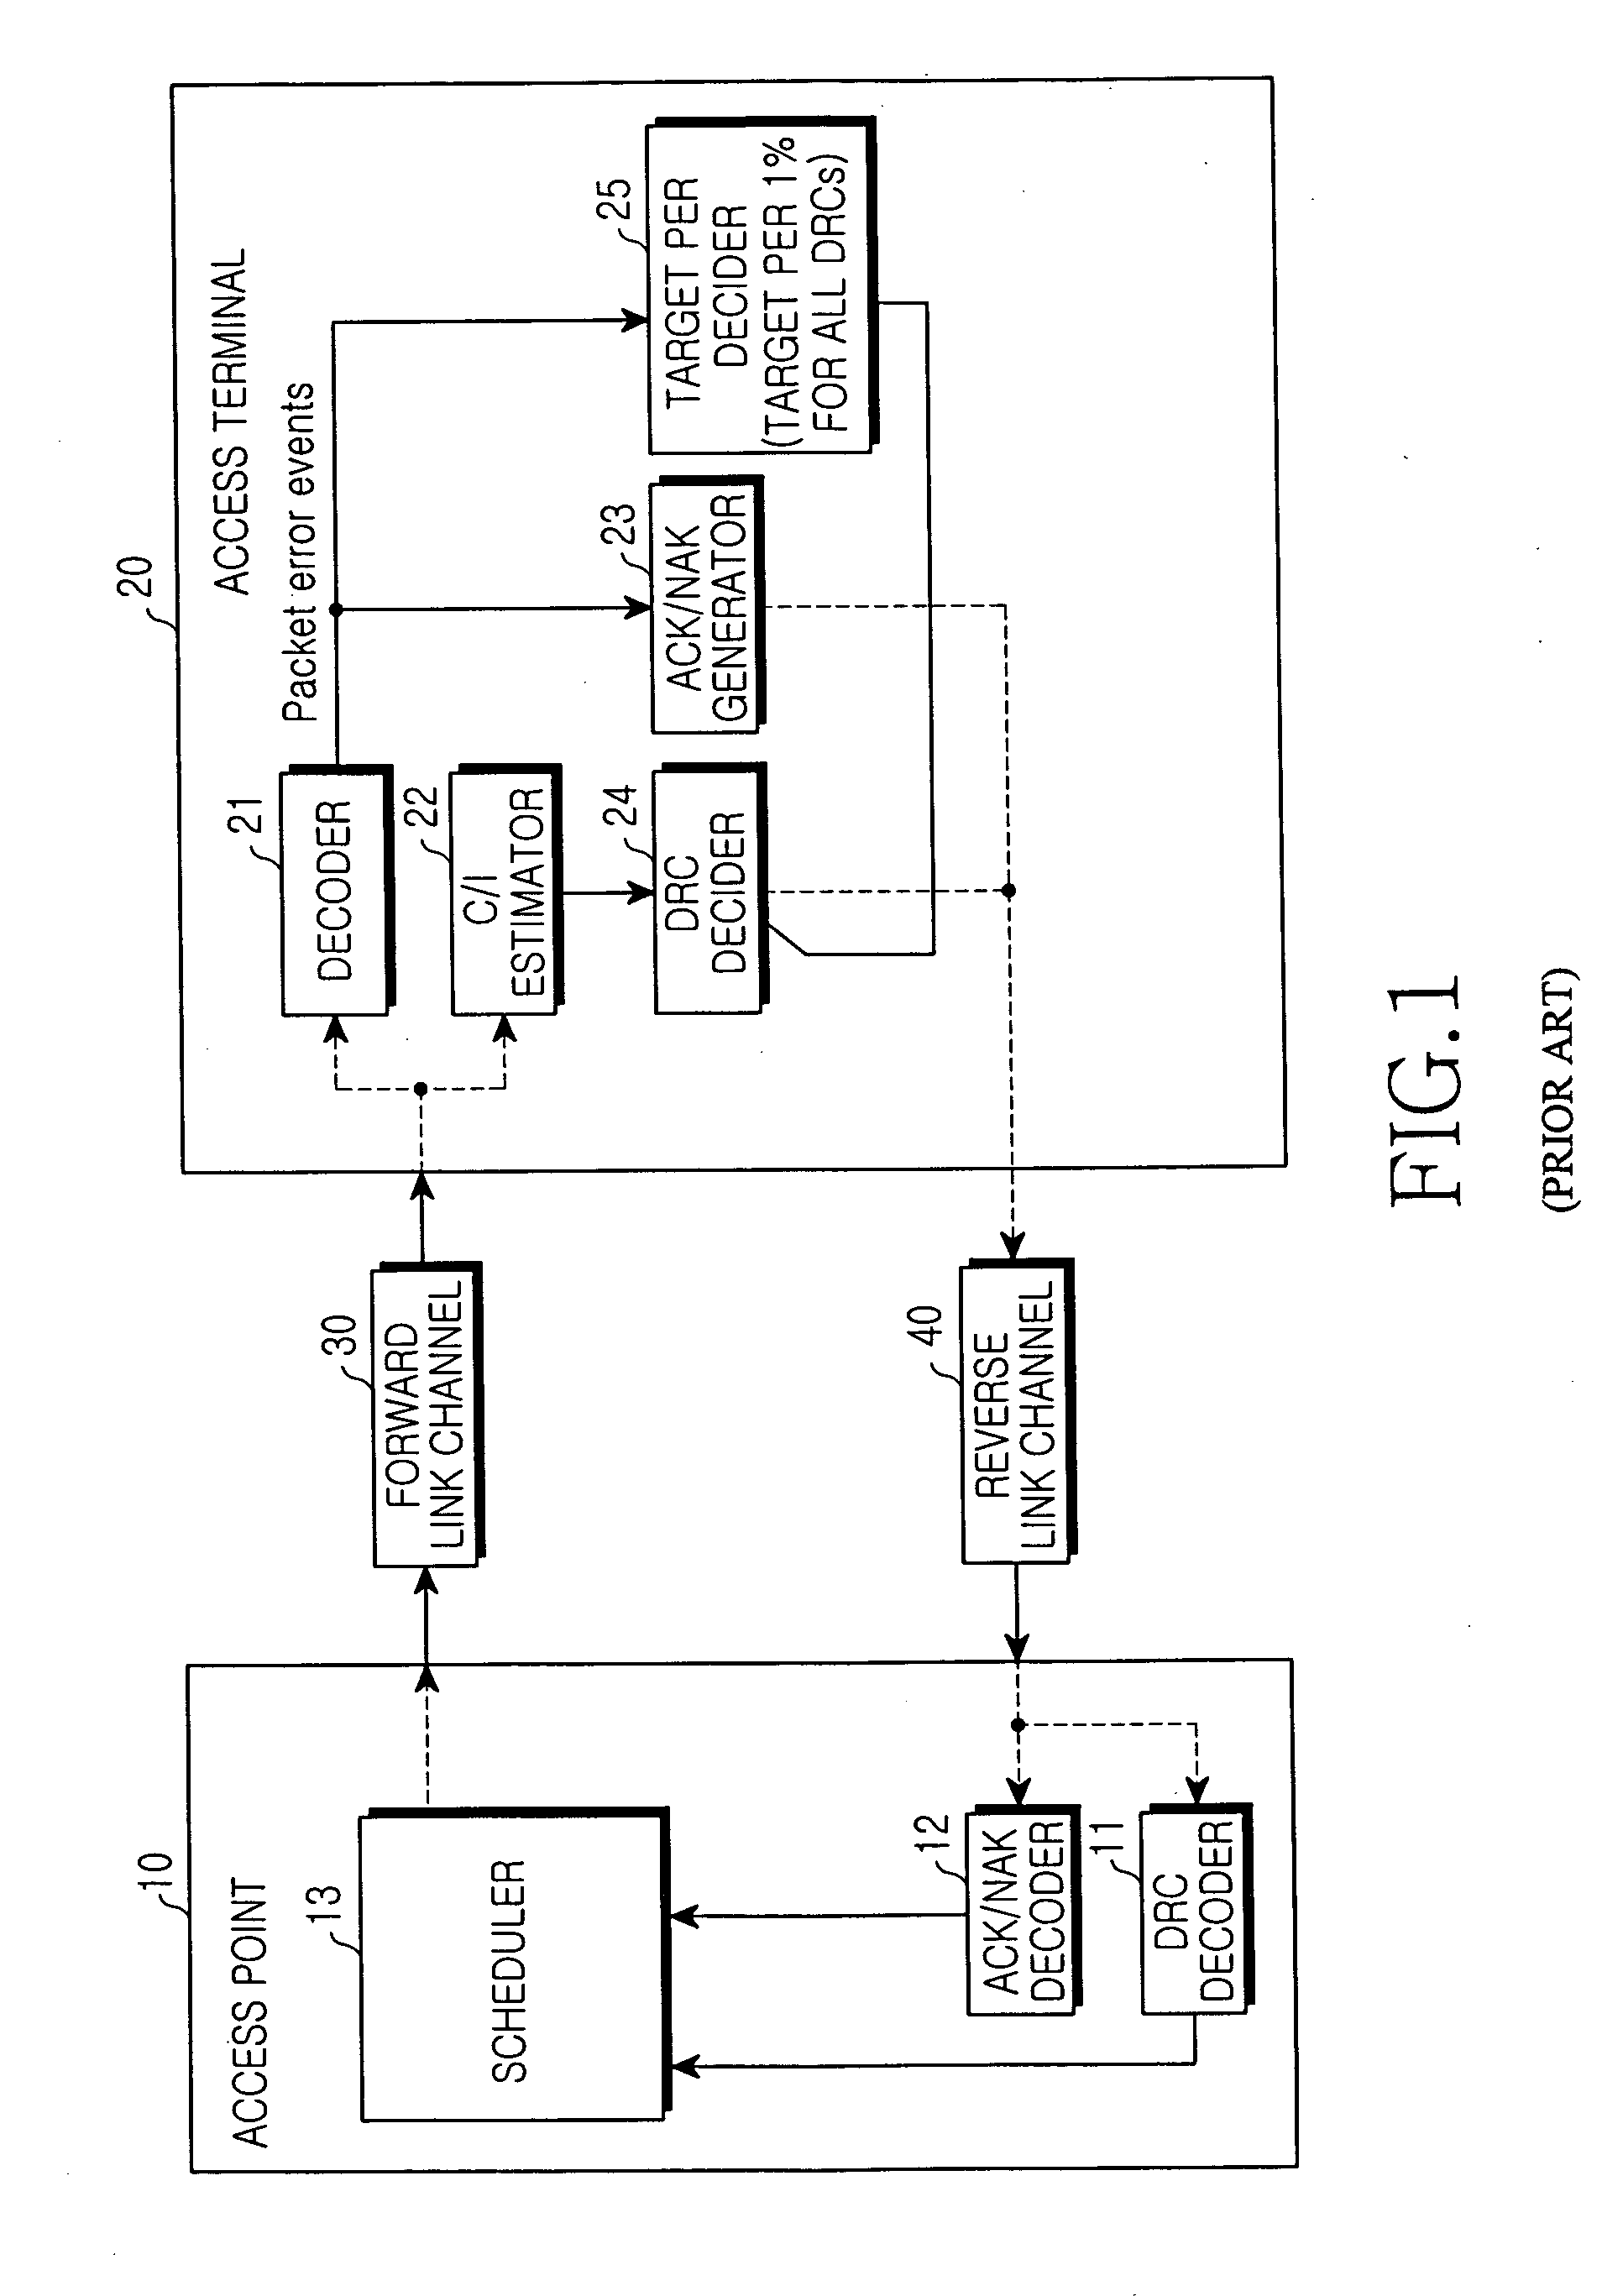 Apparatus and method for controlling a forward data rate in a mobile communication system